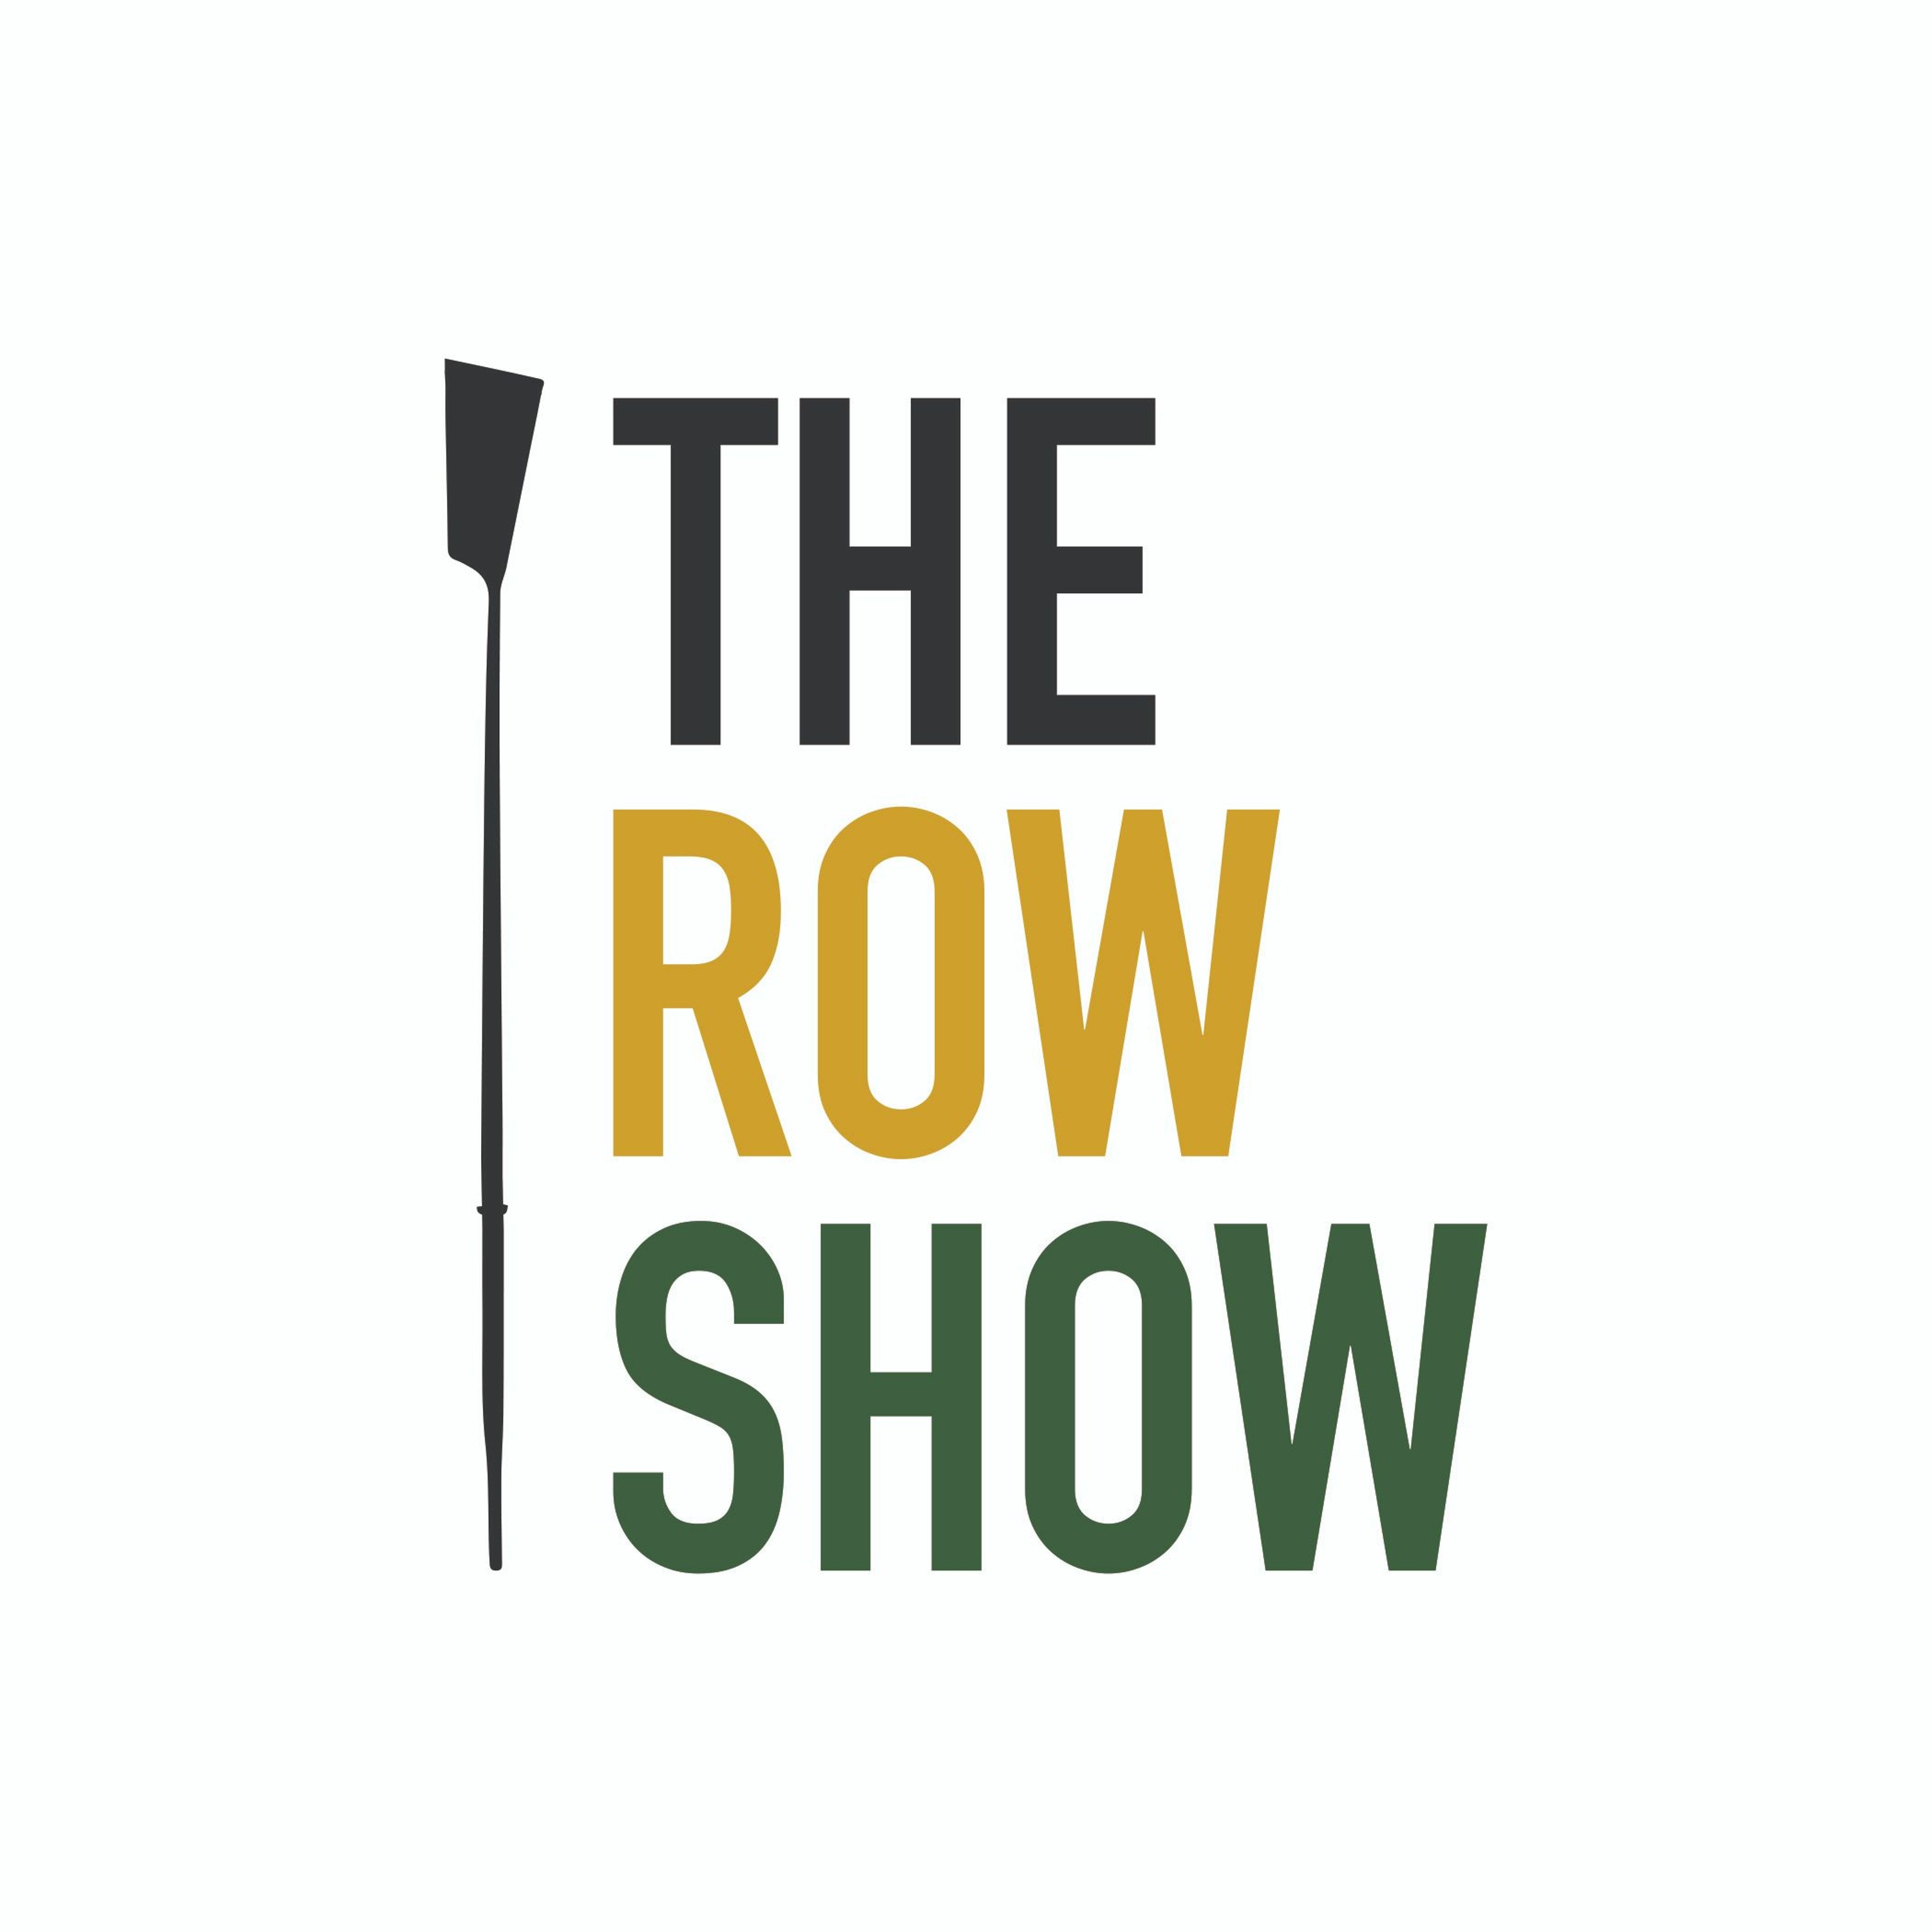 Show rows